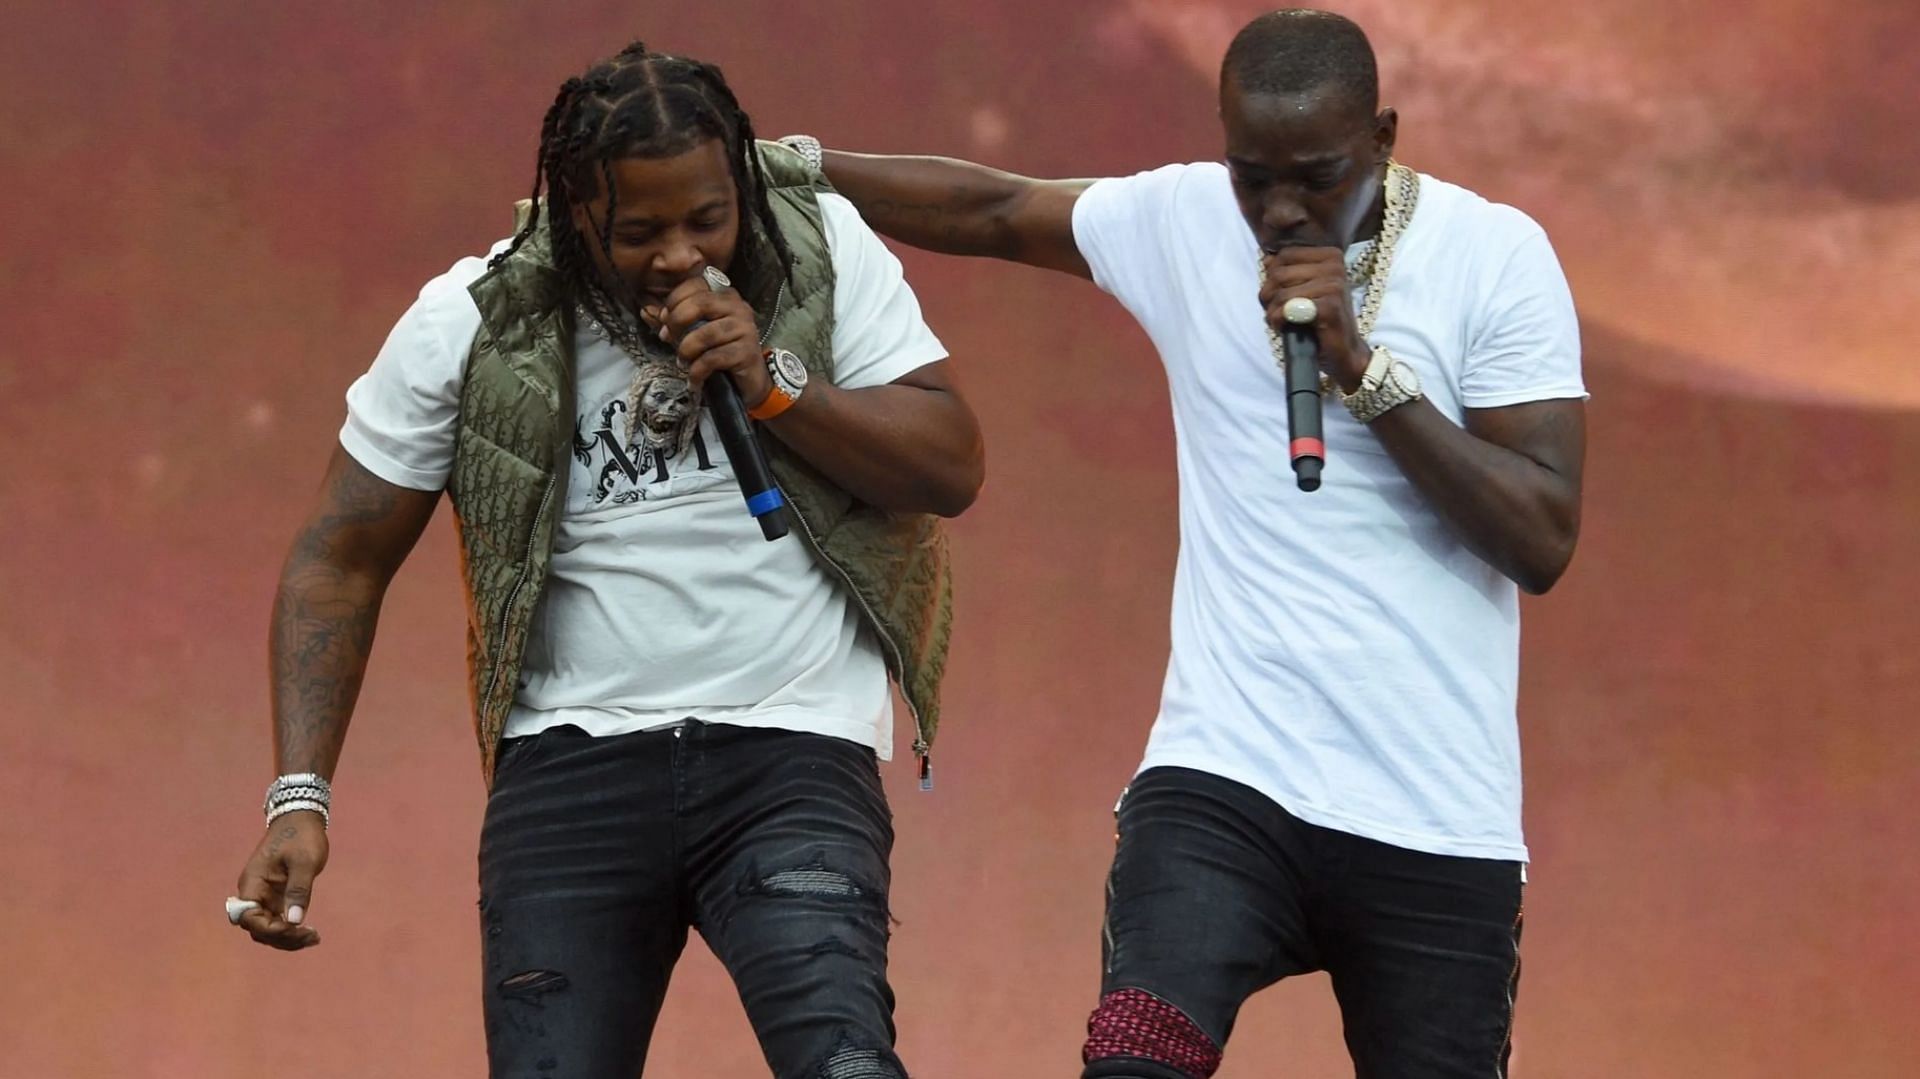 Bobby Shmurda and Rowdy Rebel have announced their joint tour. (Image via Kevin Mazur / Getty)